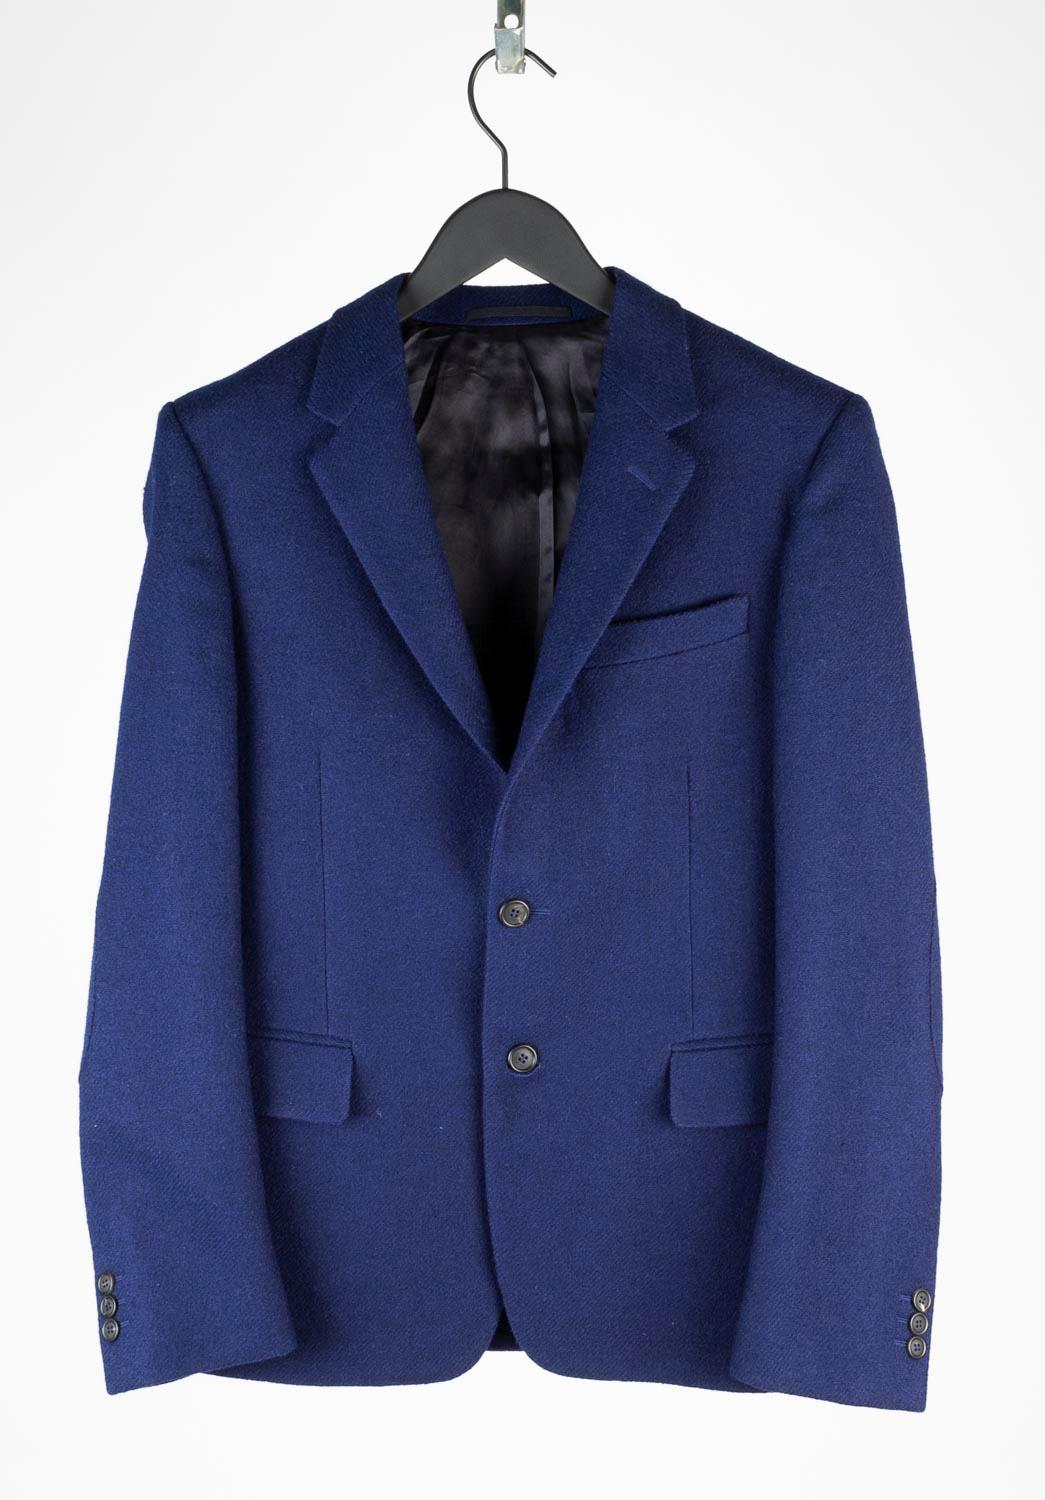 100% genuine Prada Men’s Jacket, S625
Color: blue
(An actual color may a bit vary due to individual computer screen interpretation)
Material: 80% wool, 20% mohair
Tag size: ITA 50 (Medium)
This jacket is great quality item. Rate 10 of 10, new